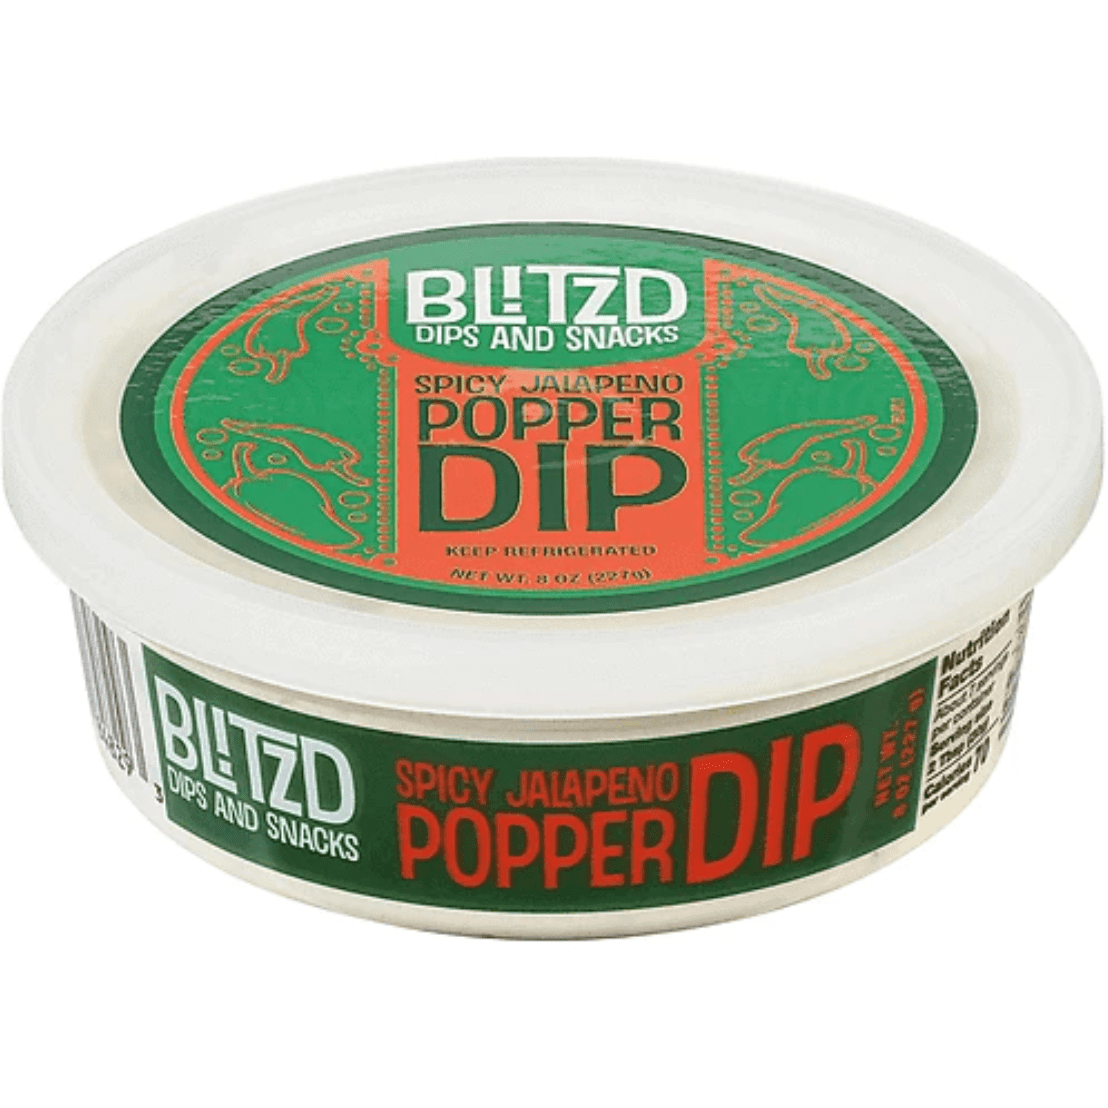 Blitzd: Dips and Snacks